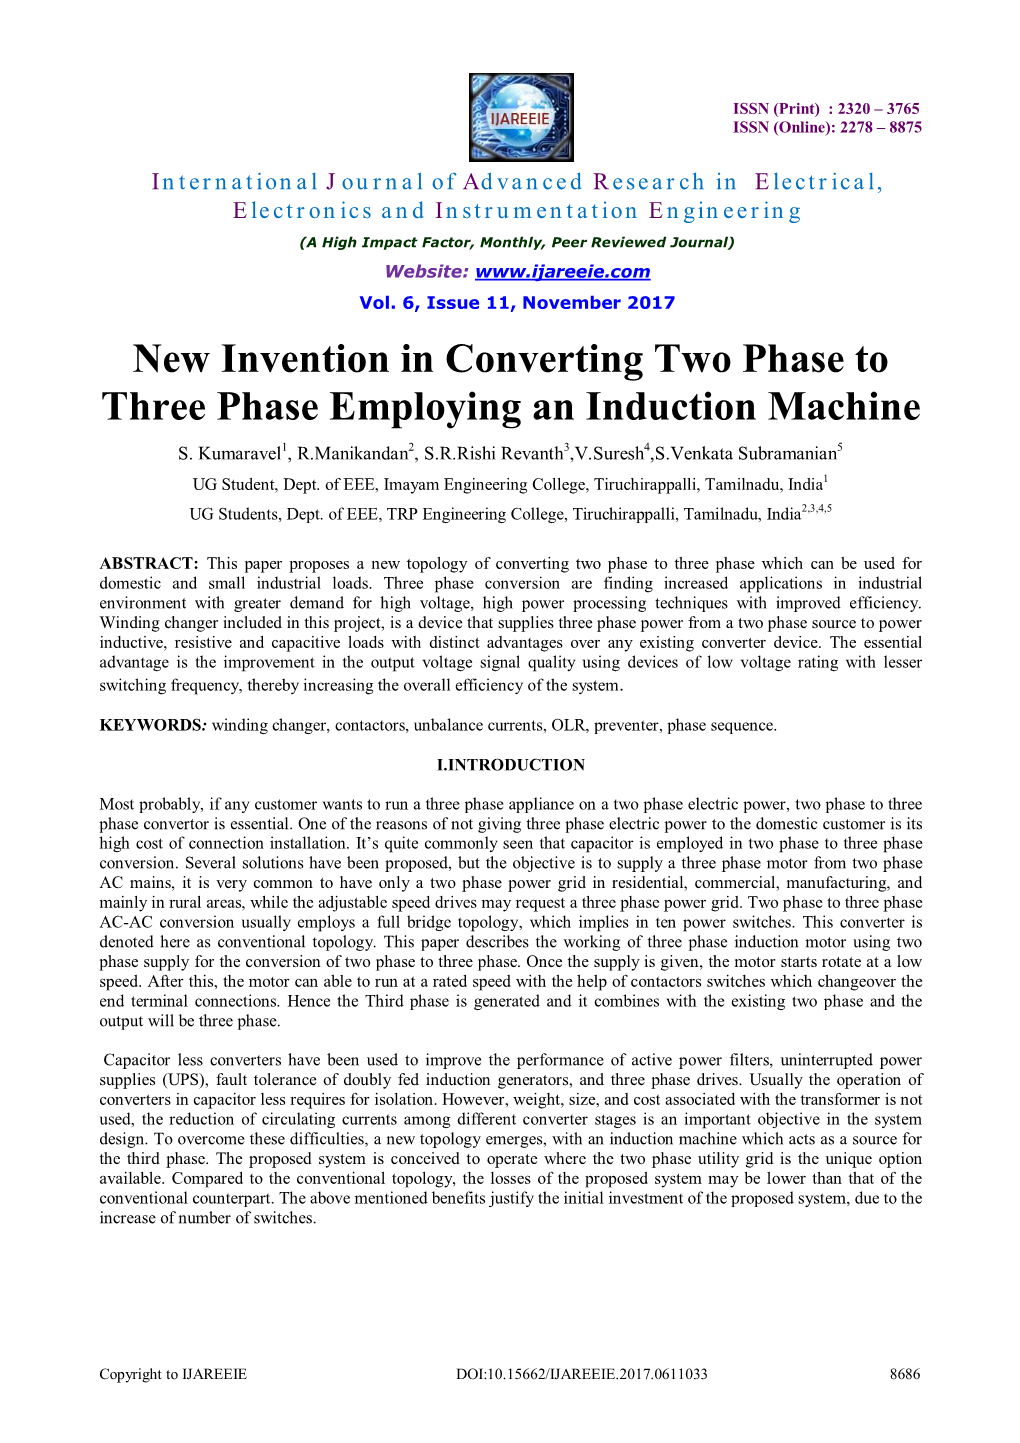 New Invention in Converting Two Phase to Three Phase Employing an Induction Machine S